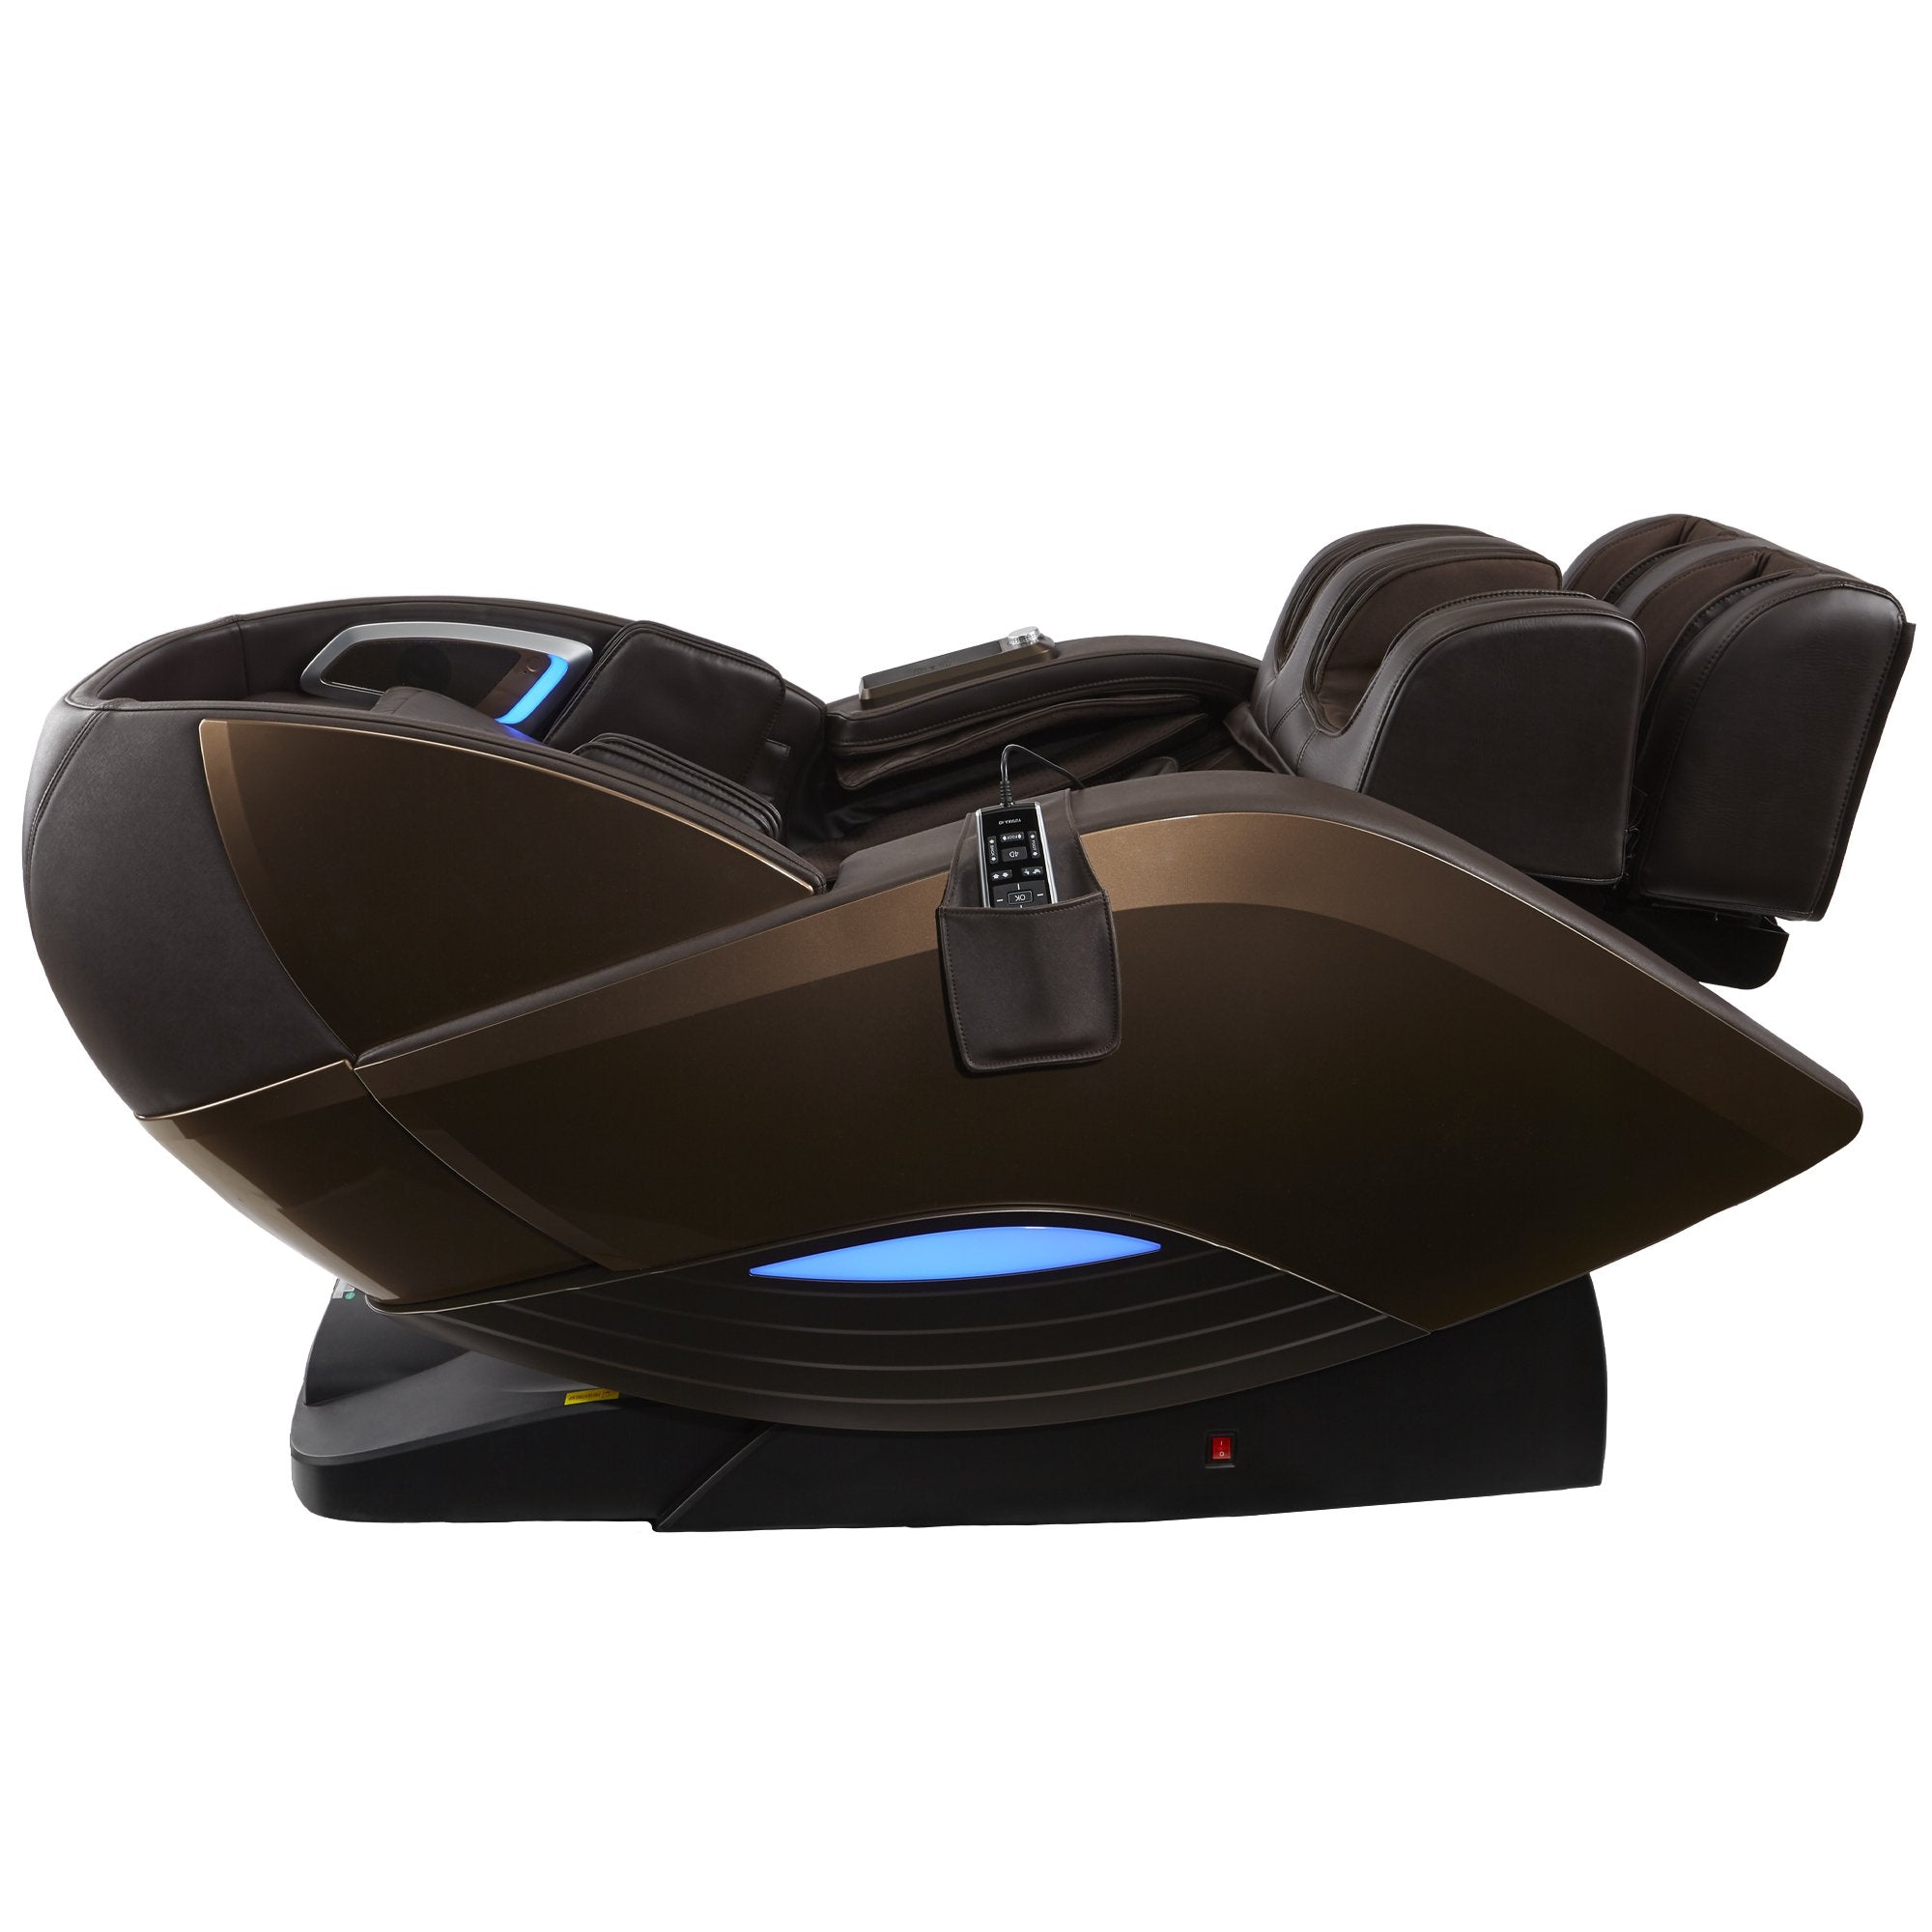 KyotaMassage ChairsKyota Yutaka M898 4D (Certified Pre-Owned)BrownMassage Chair Heaven